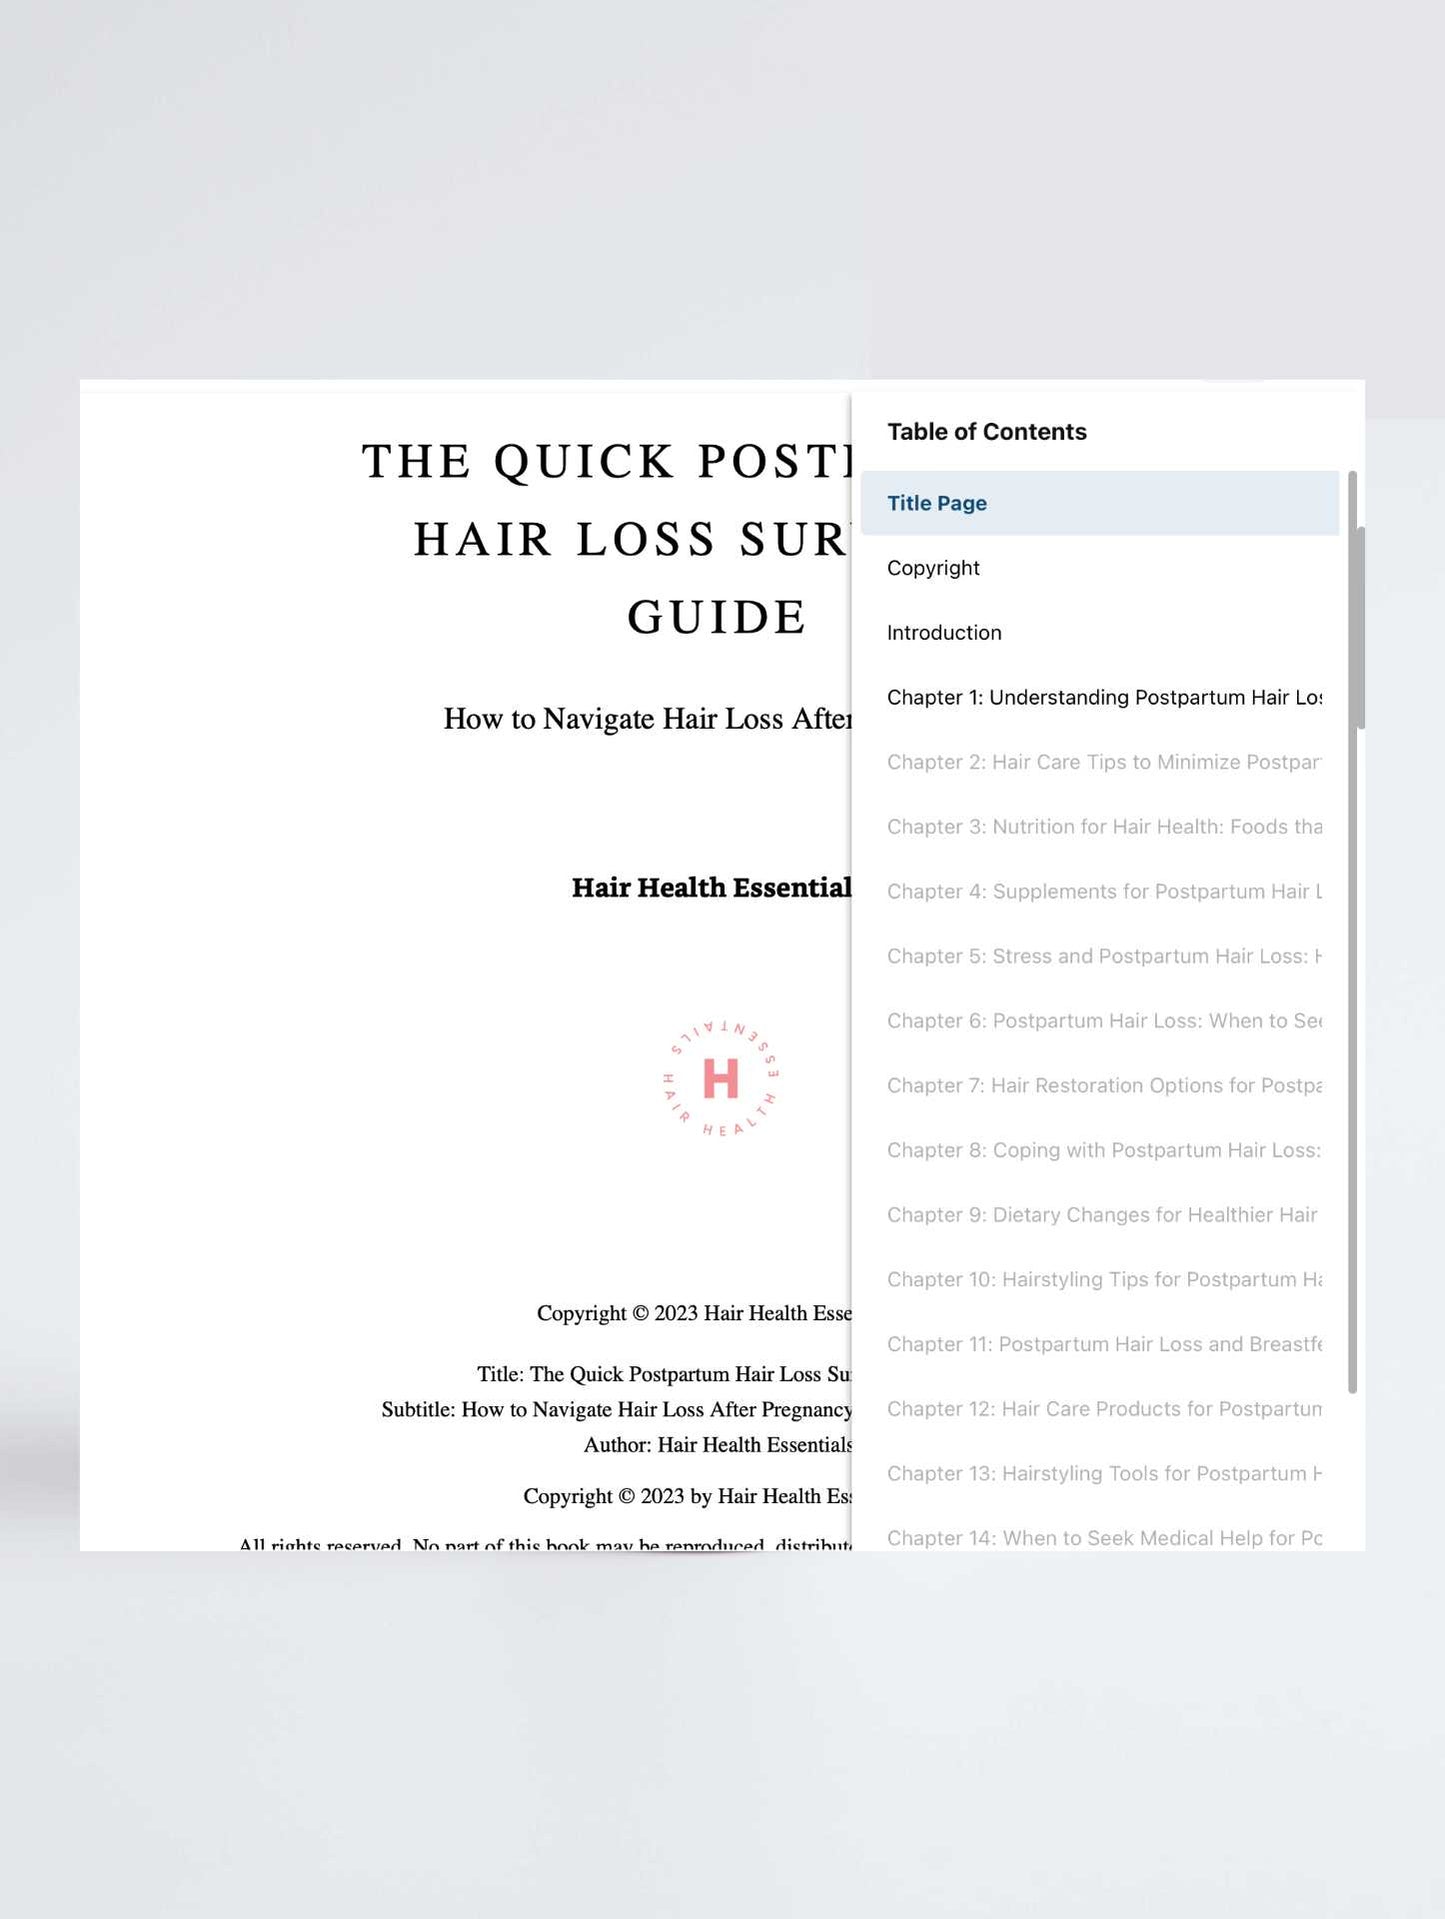 The Quick Postpartum Hair Loss Survival Guide: How to Navigate Hair Loss after Pregnancy